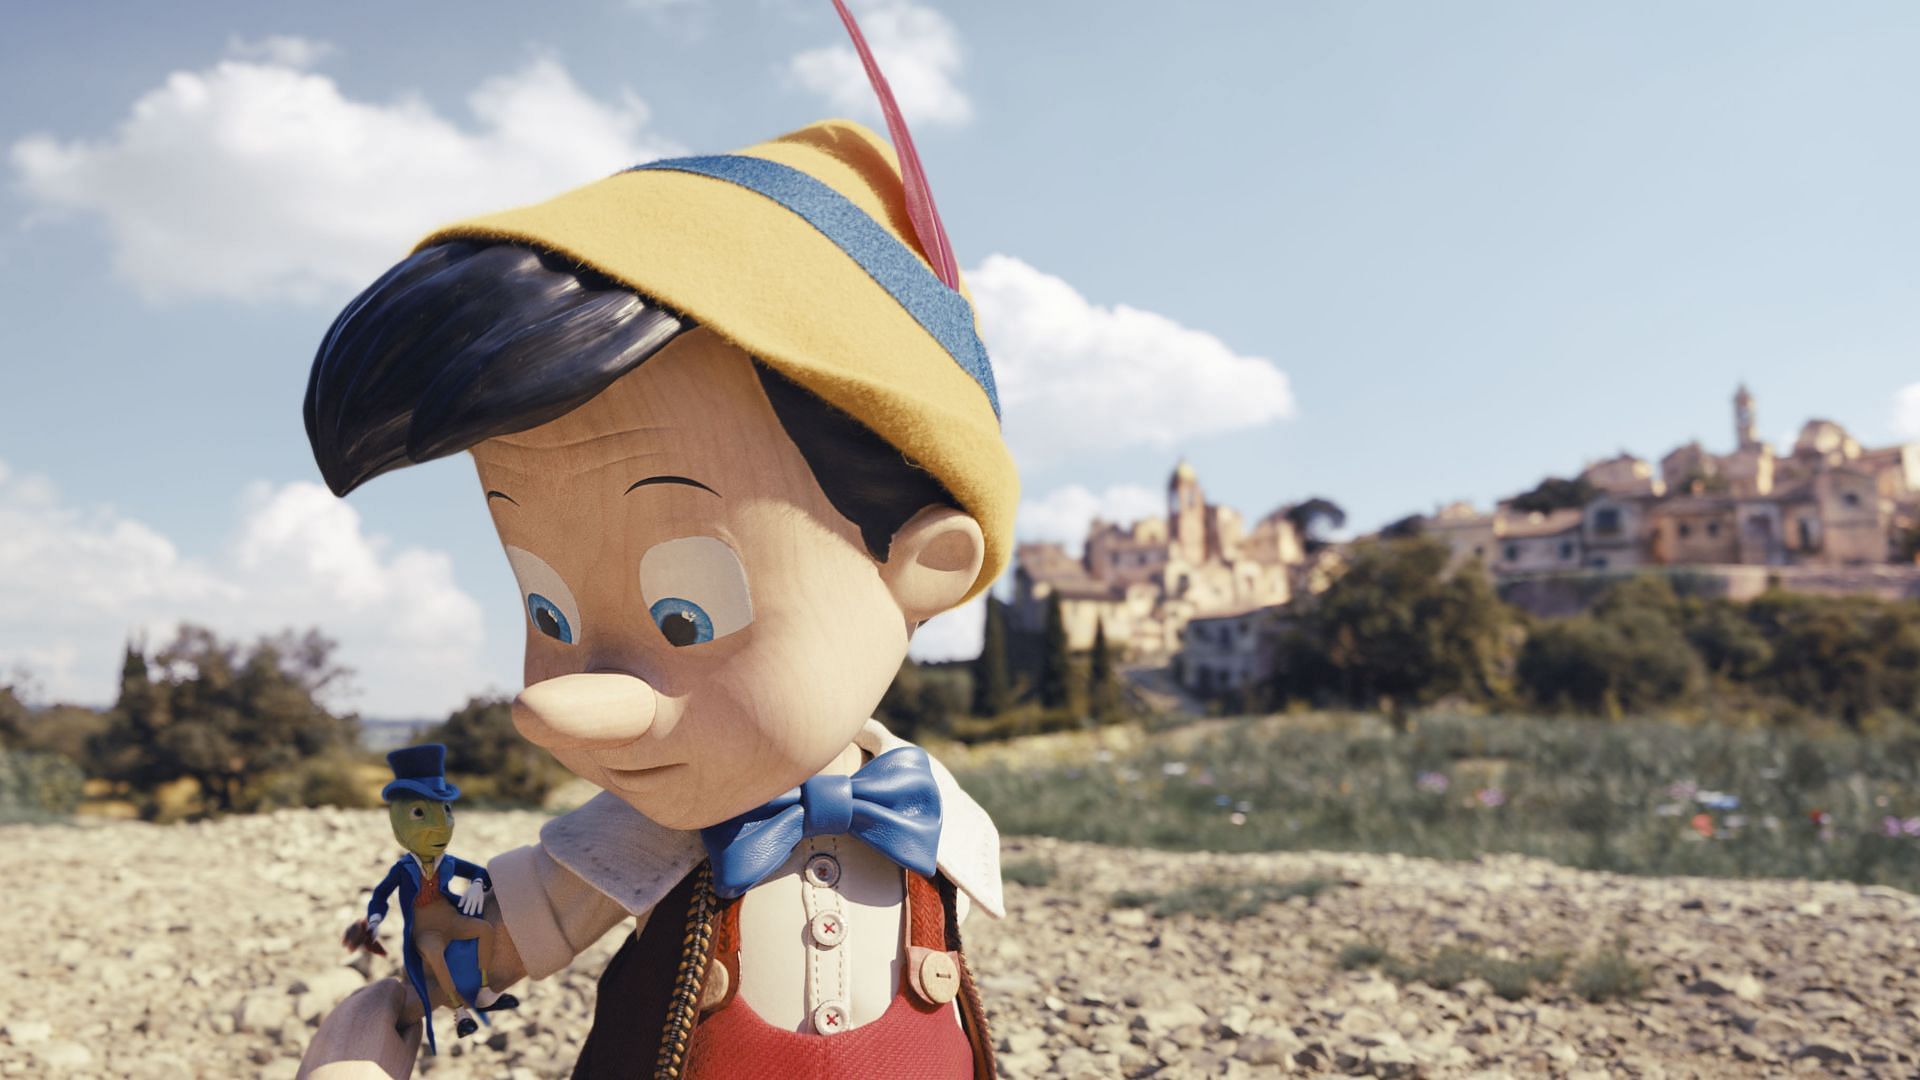 5 things to know about Tom Hanks' Disney+ musical Pinocchio